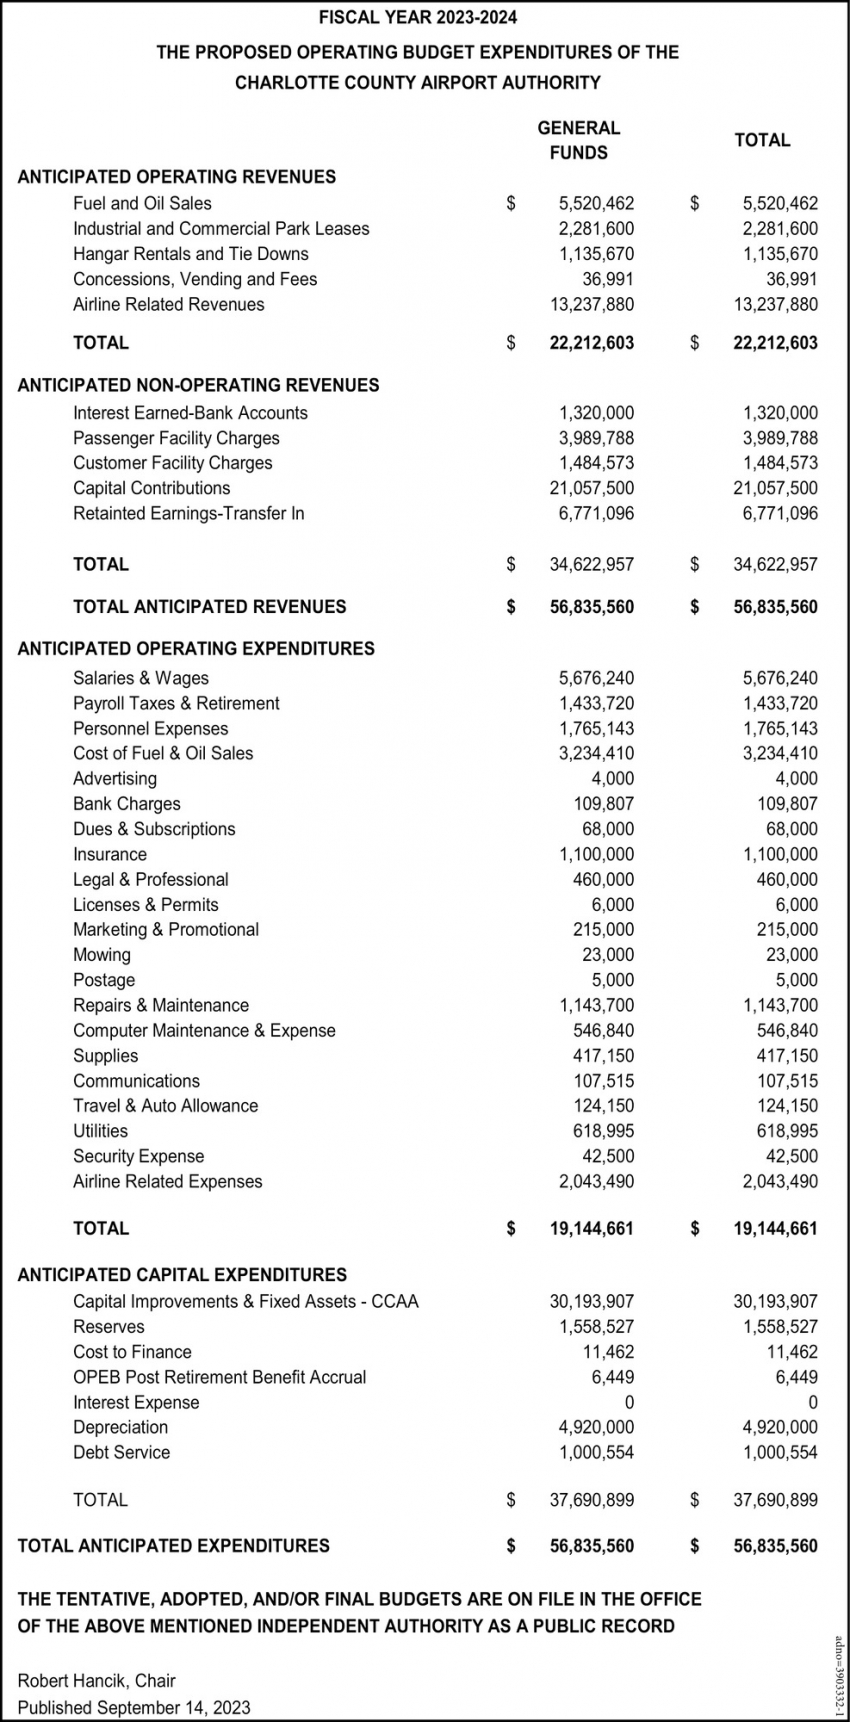 Proposed Operating Budget Expenditures